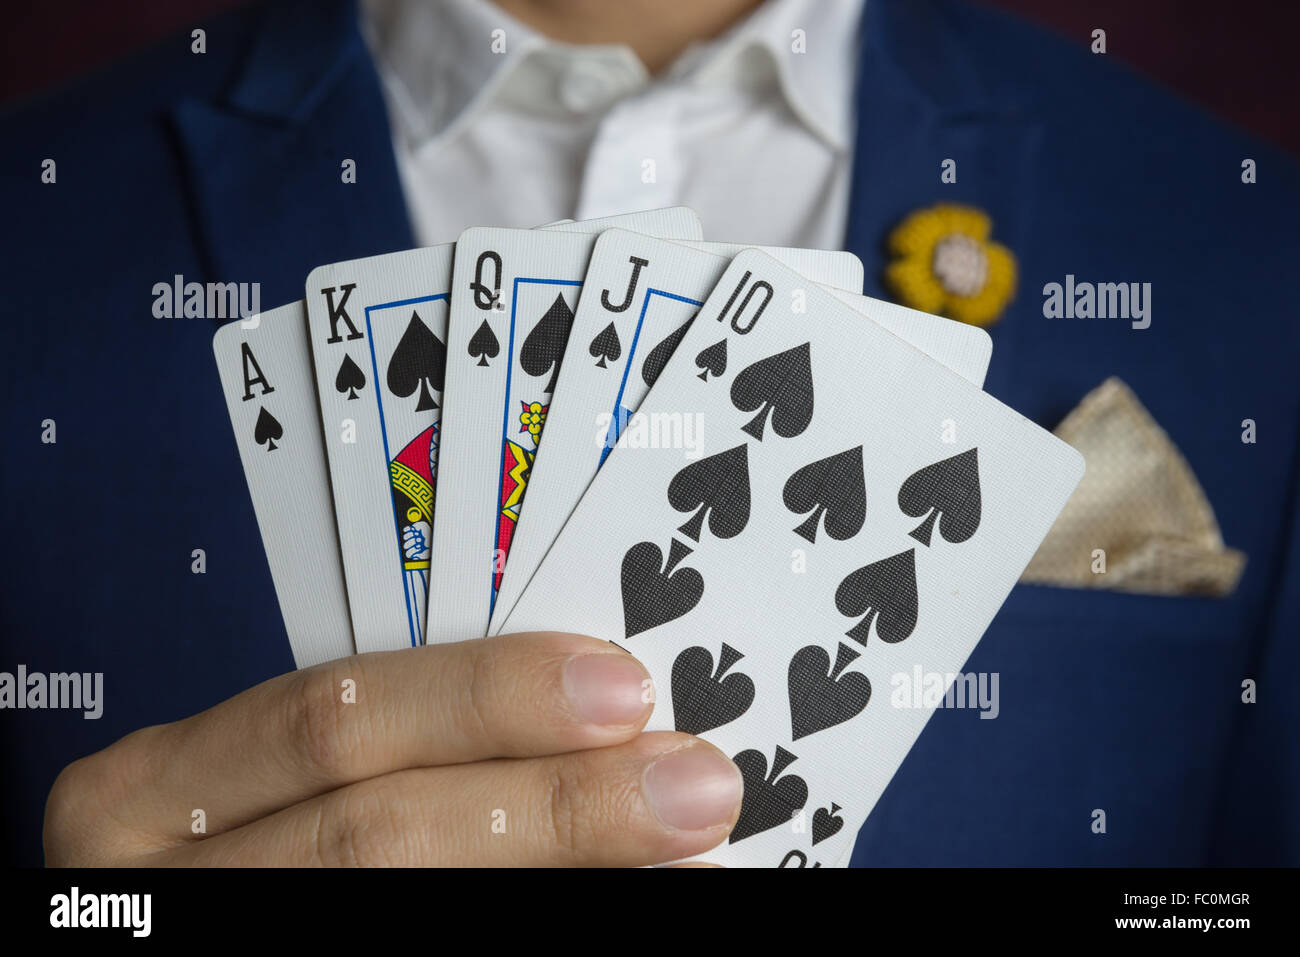 man wearing blue suit, jacket and flower brooch, holding royal straight flush, casino concept Stock Photo